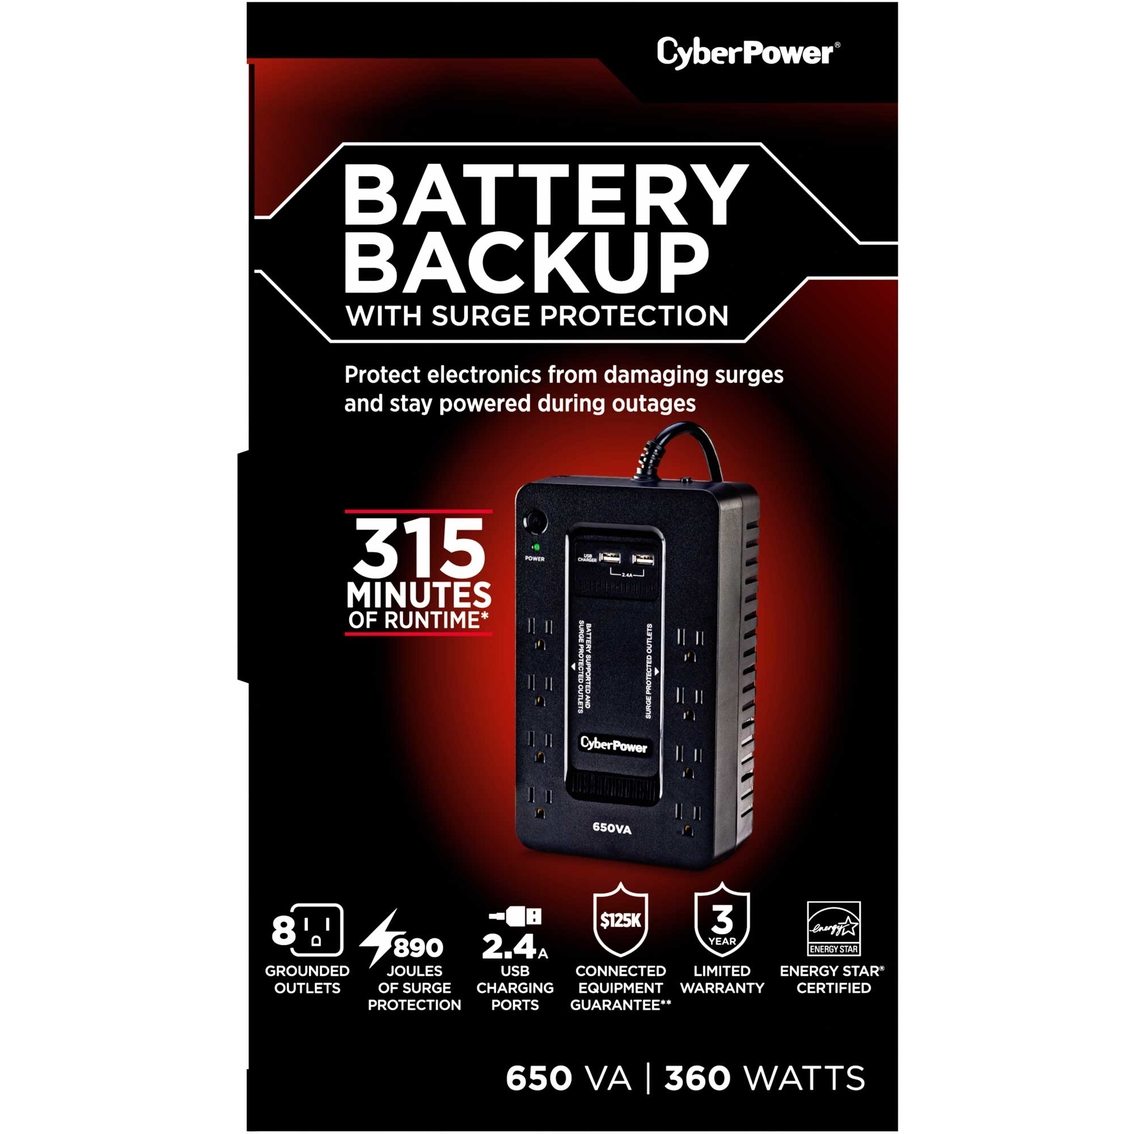 CyberPower 650VA UPS System with 8 Outlets and 2 USB Charging Ports - Image 4 of 7